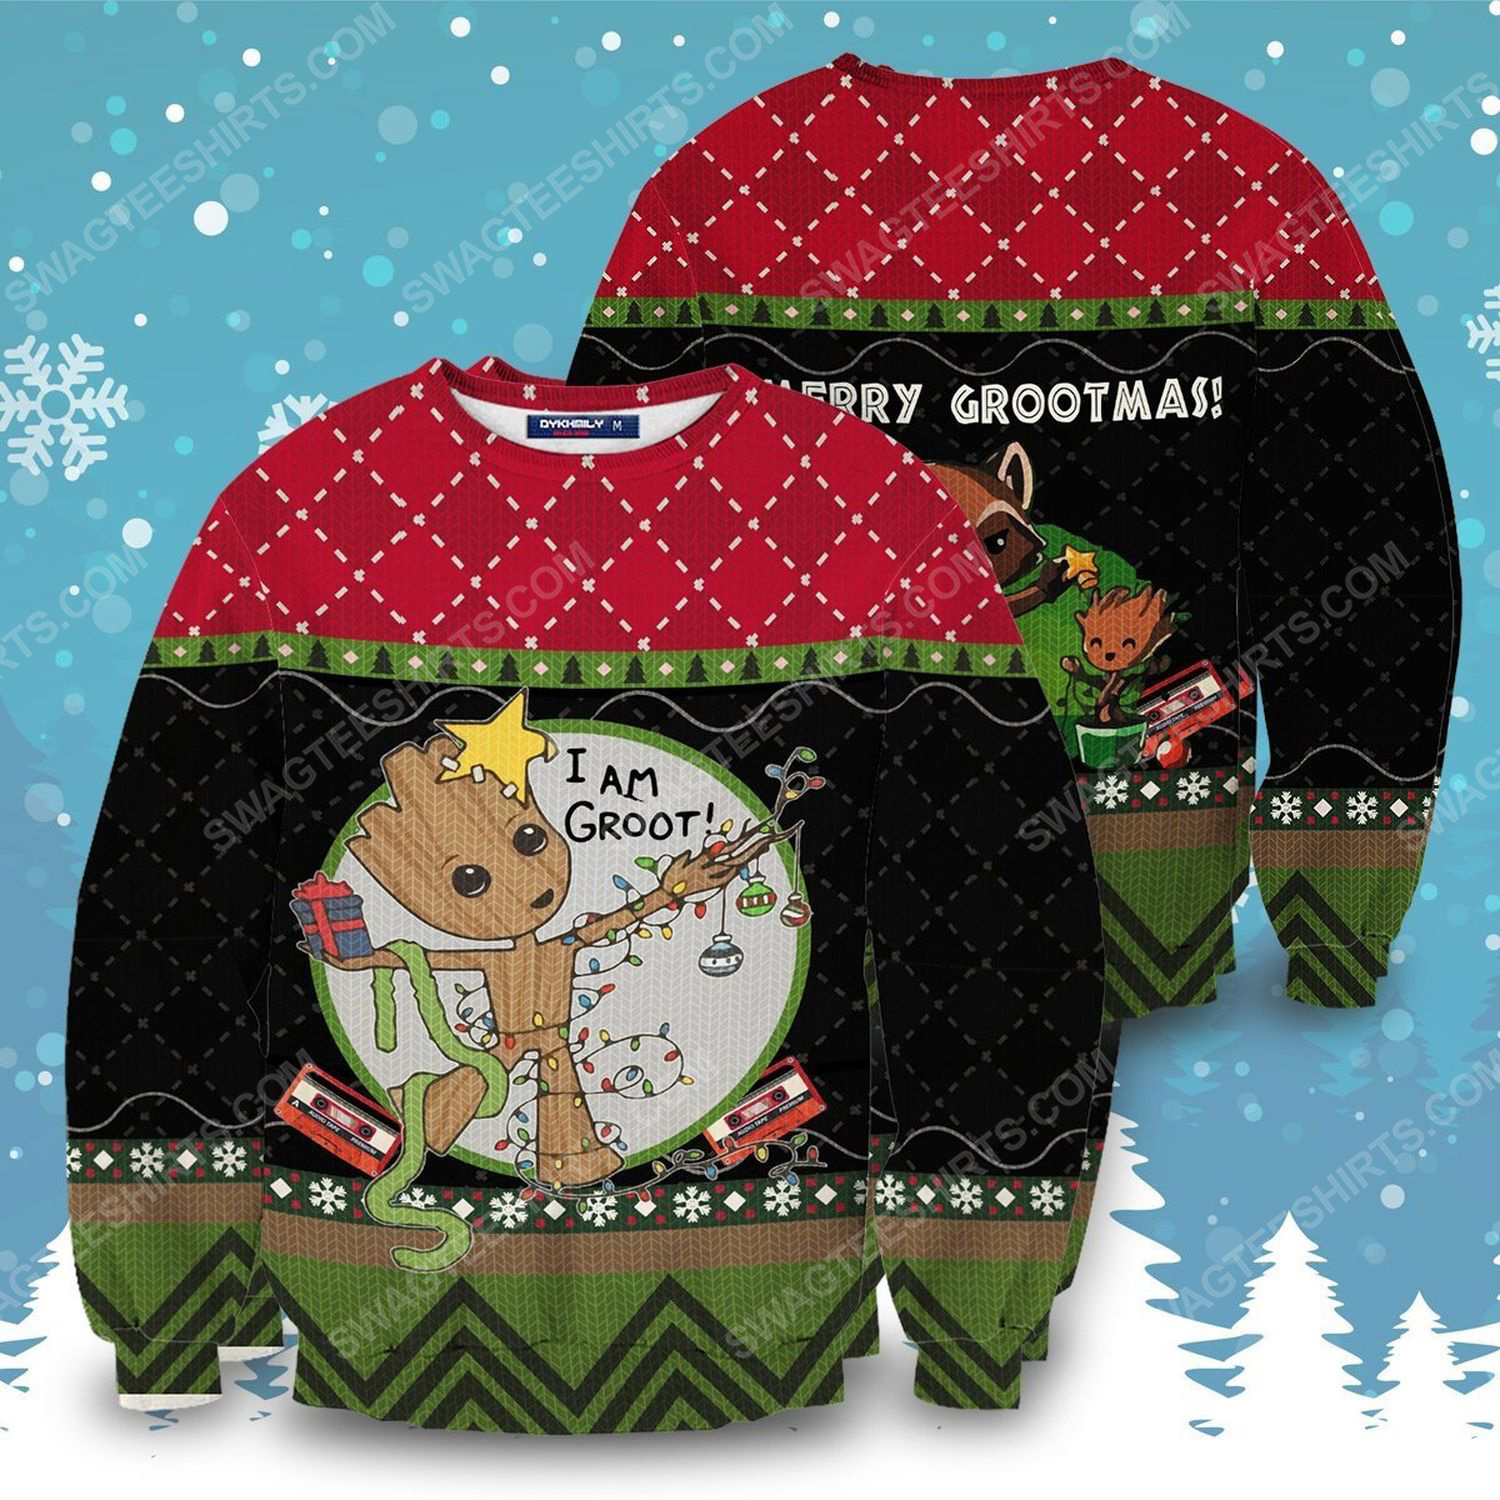 I am groot for christmas full print ugly christmas sweater 2